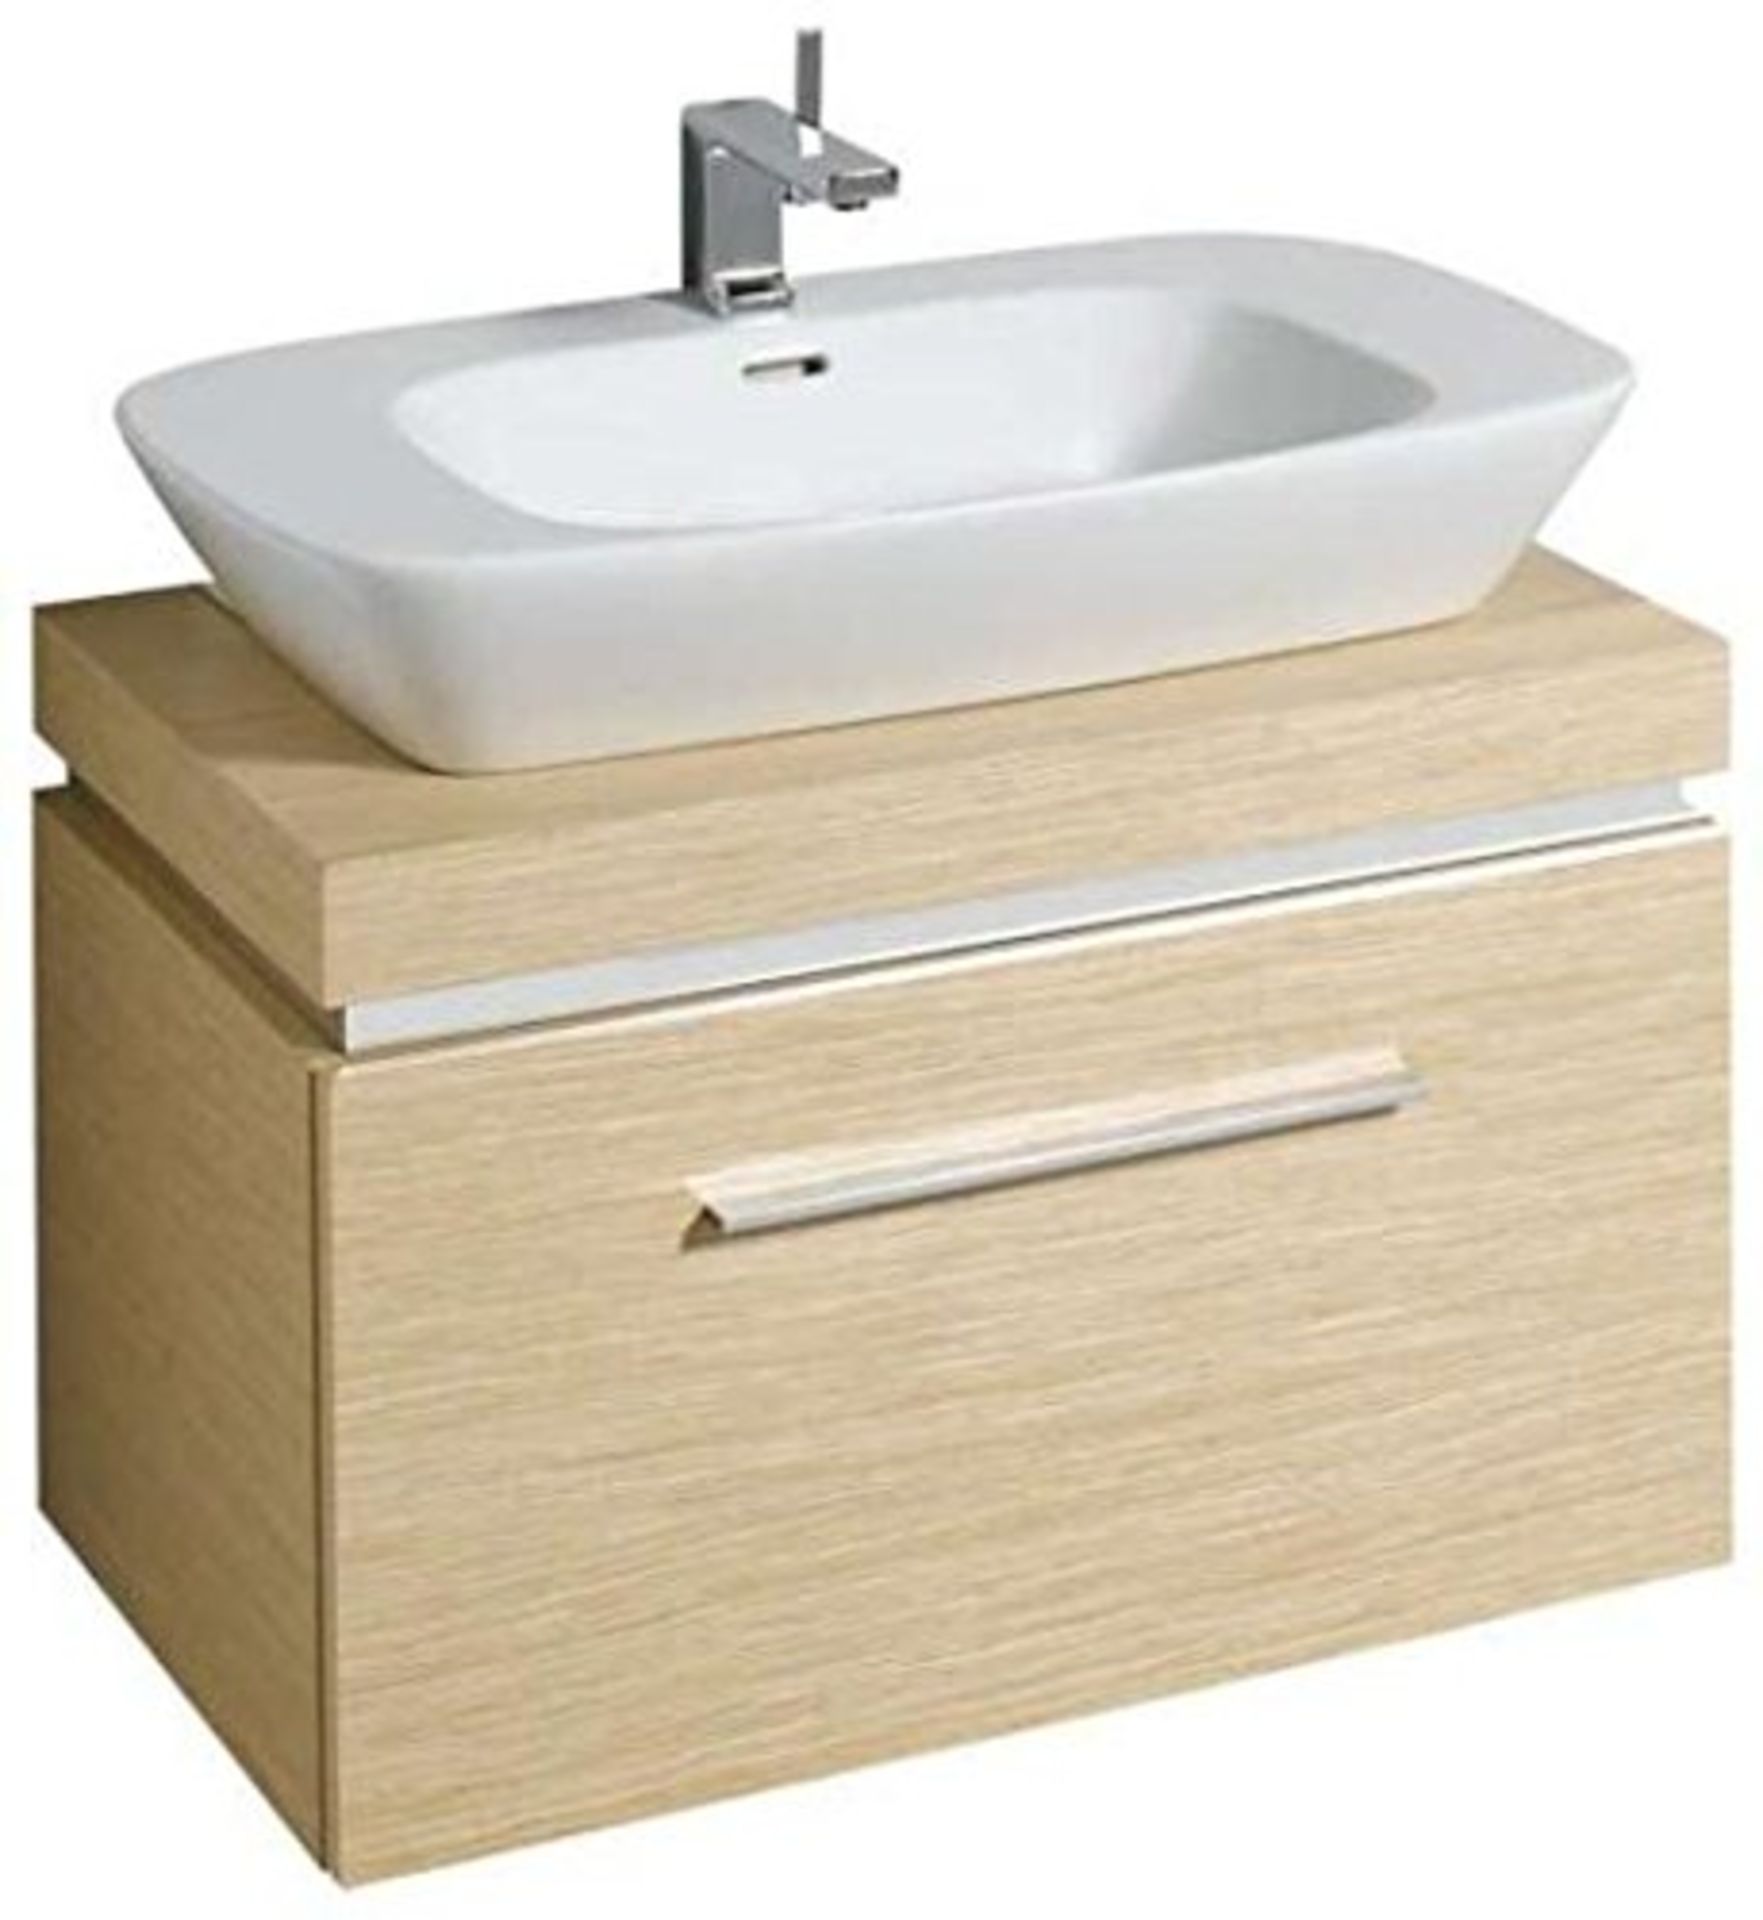 (HM2) Keramag 1000mm Silk Oak Vanity Unit with Drawer. RRP £919.99. Comes complete with basin.... - Image 2 of 2